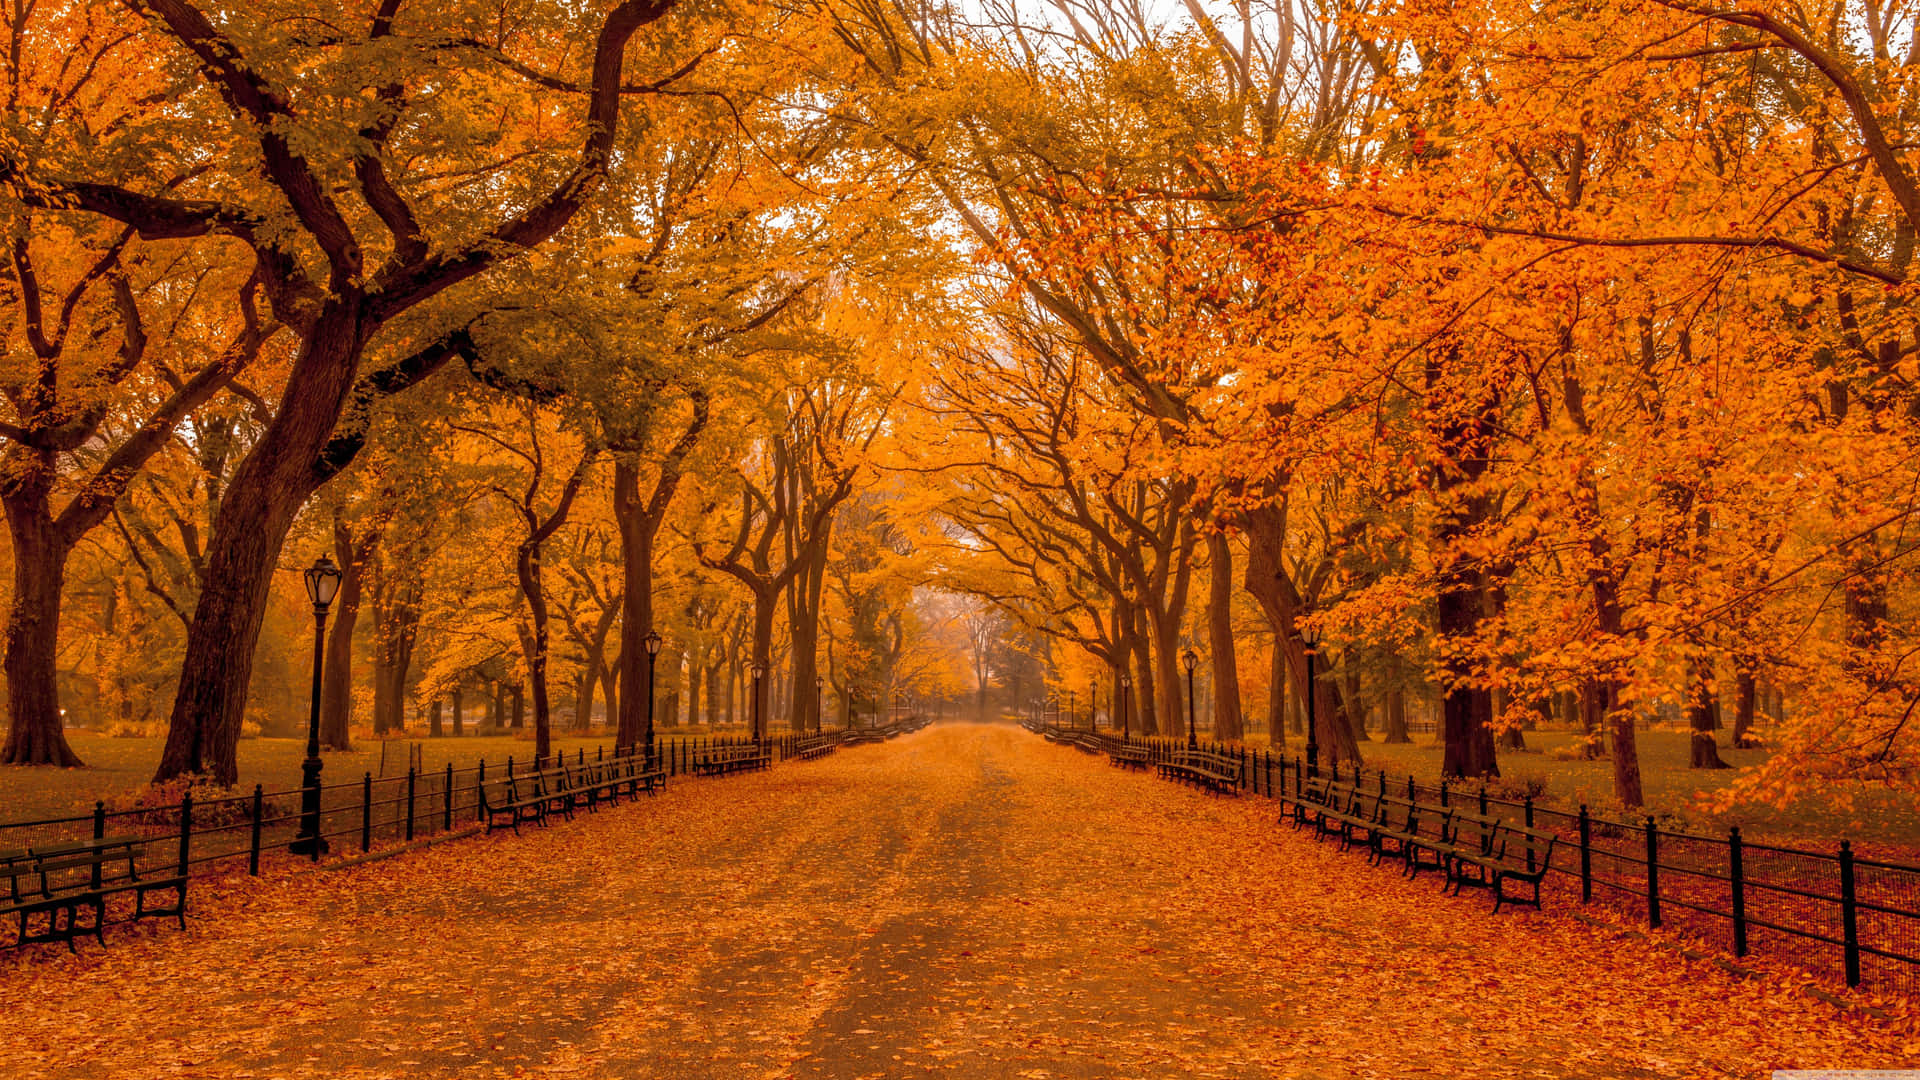 "Change is in the Air - Visualize the Splendor of Fall in vivid Ultra HD" Wallpaper